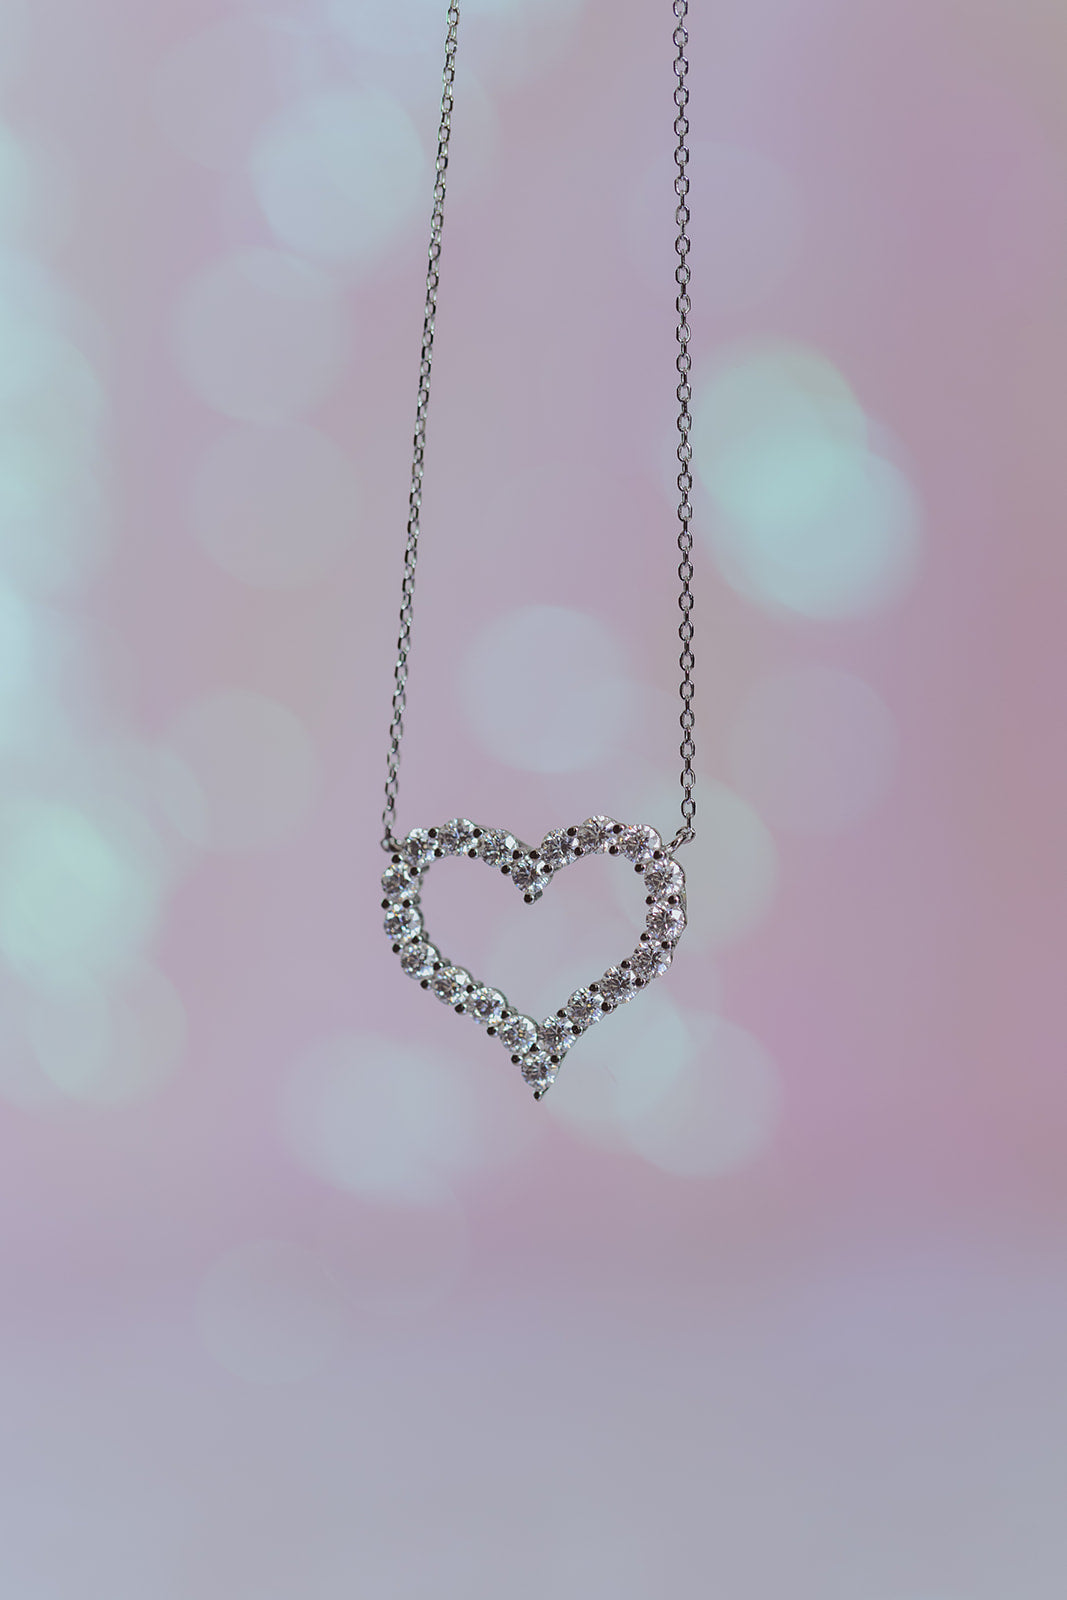 Killing Me Softly .925 Sterling Silver Moissanite Crystal Heart Necklace or Earrings